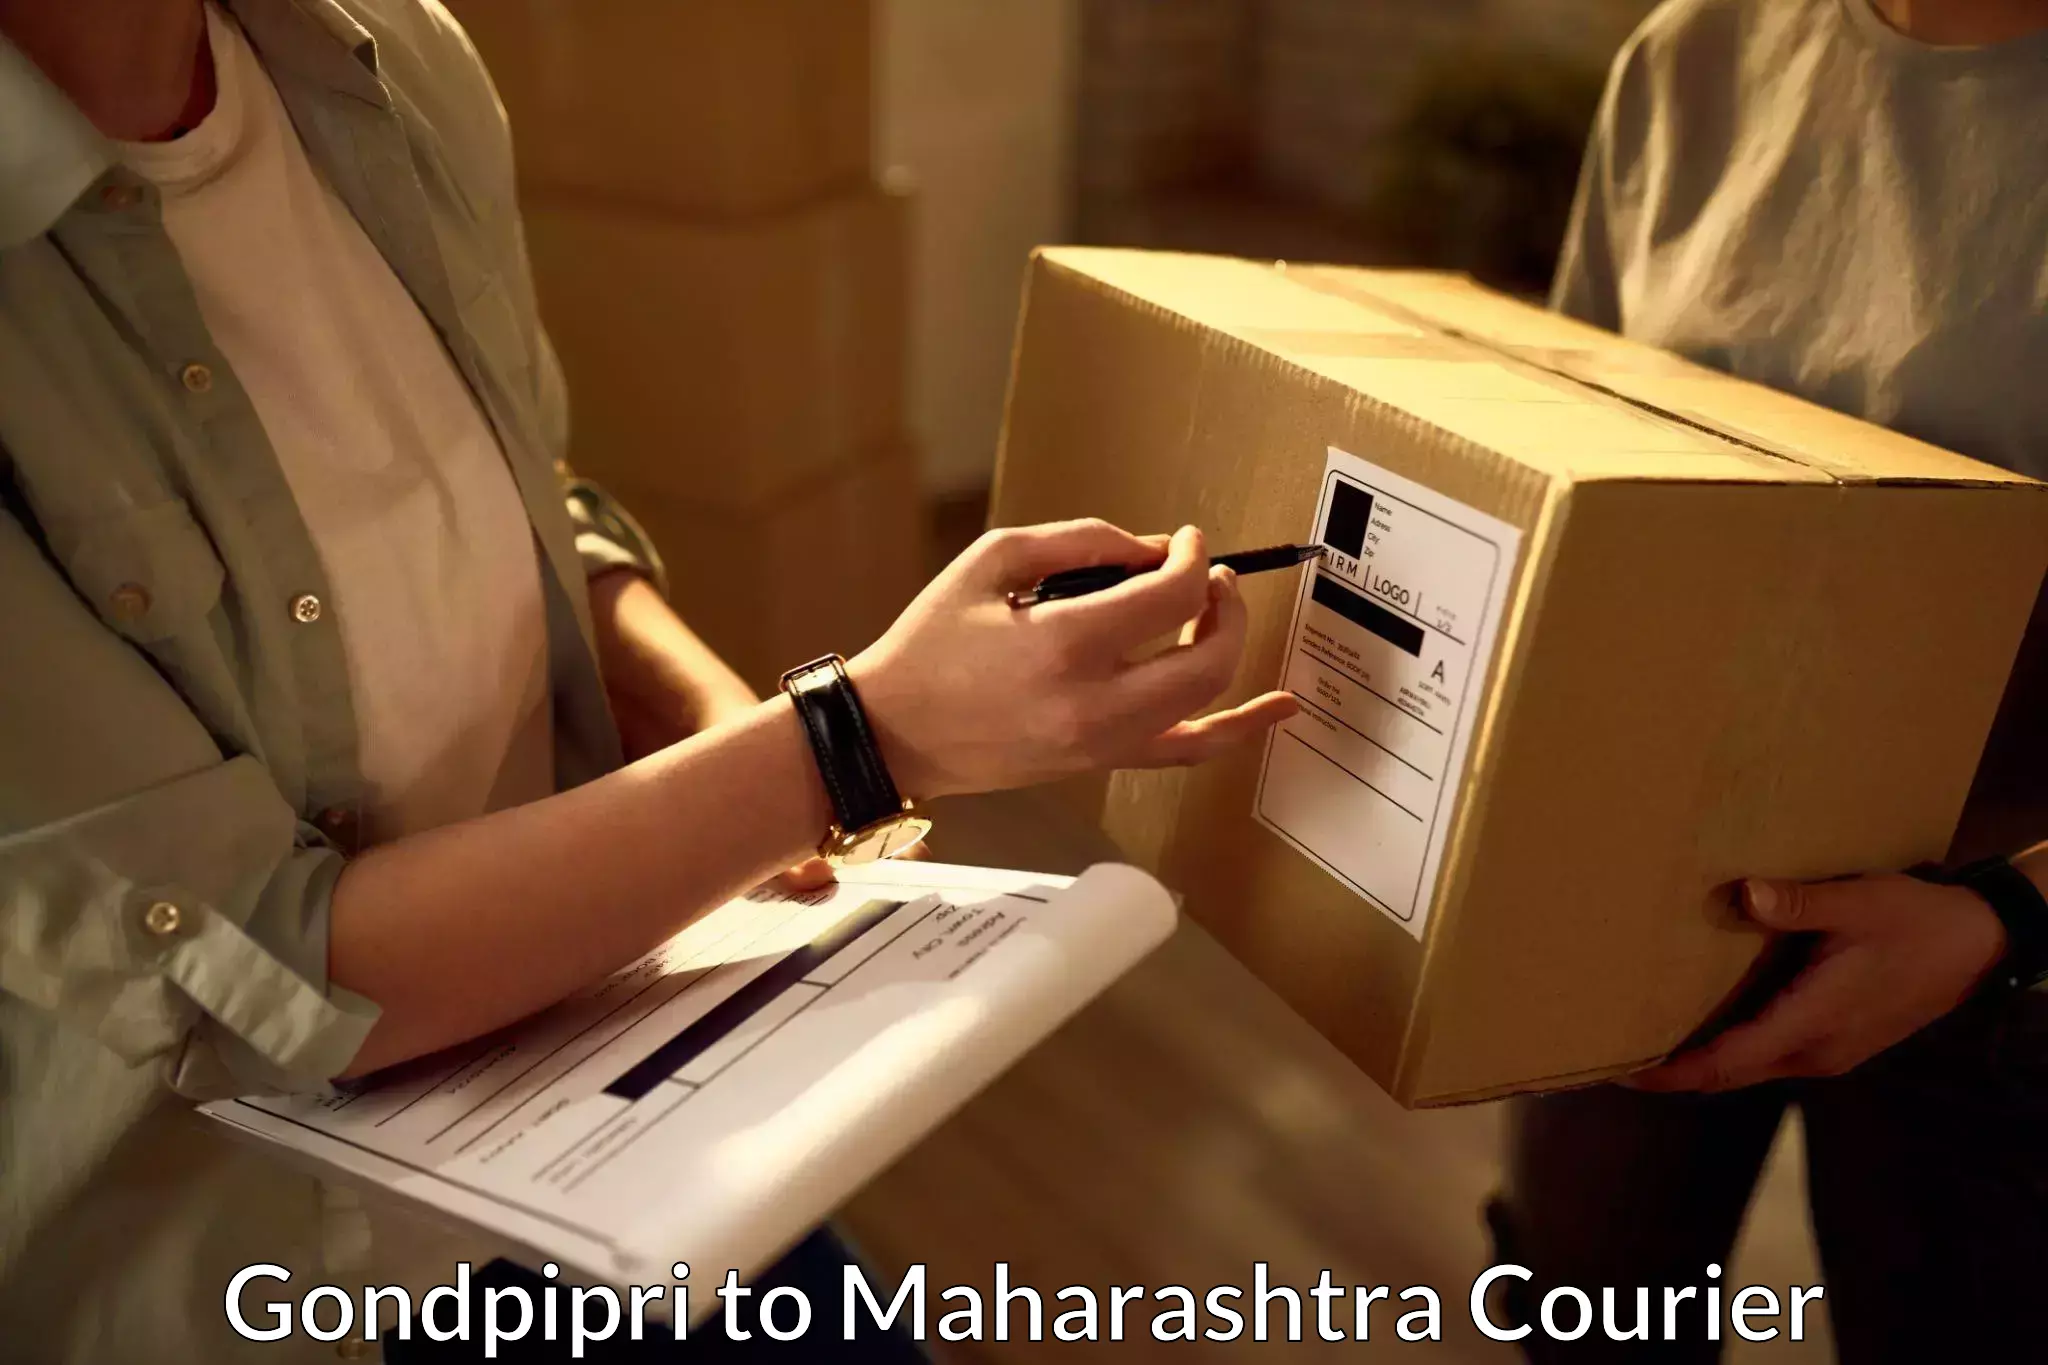 Easy access courier services Gondpipri to Ahmednagar